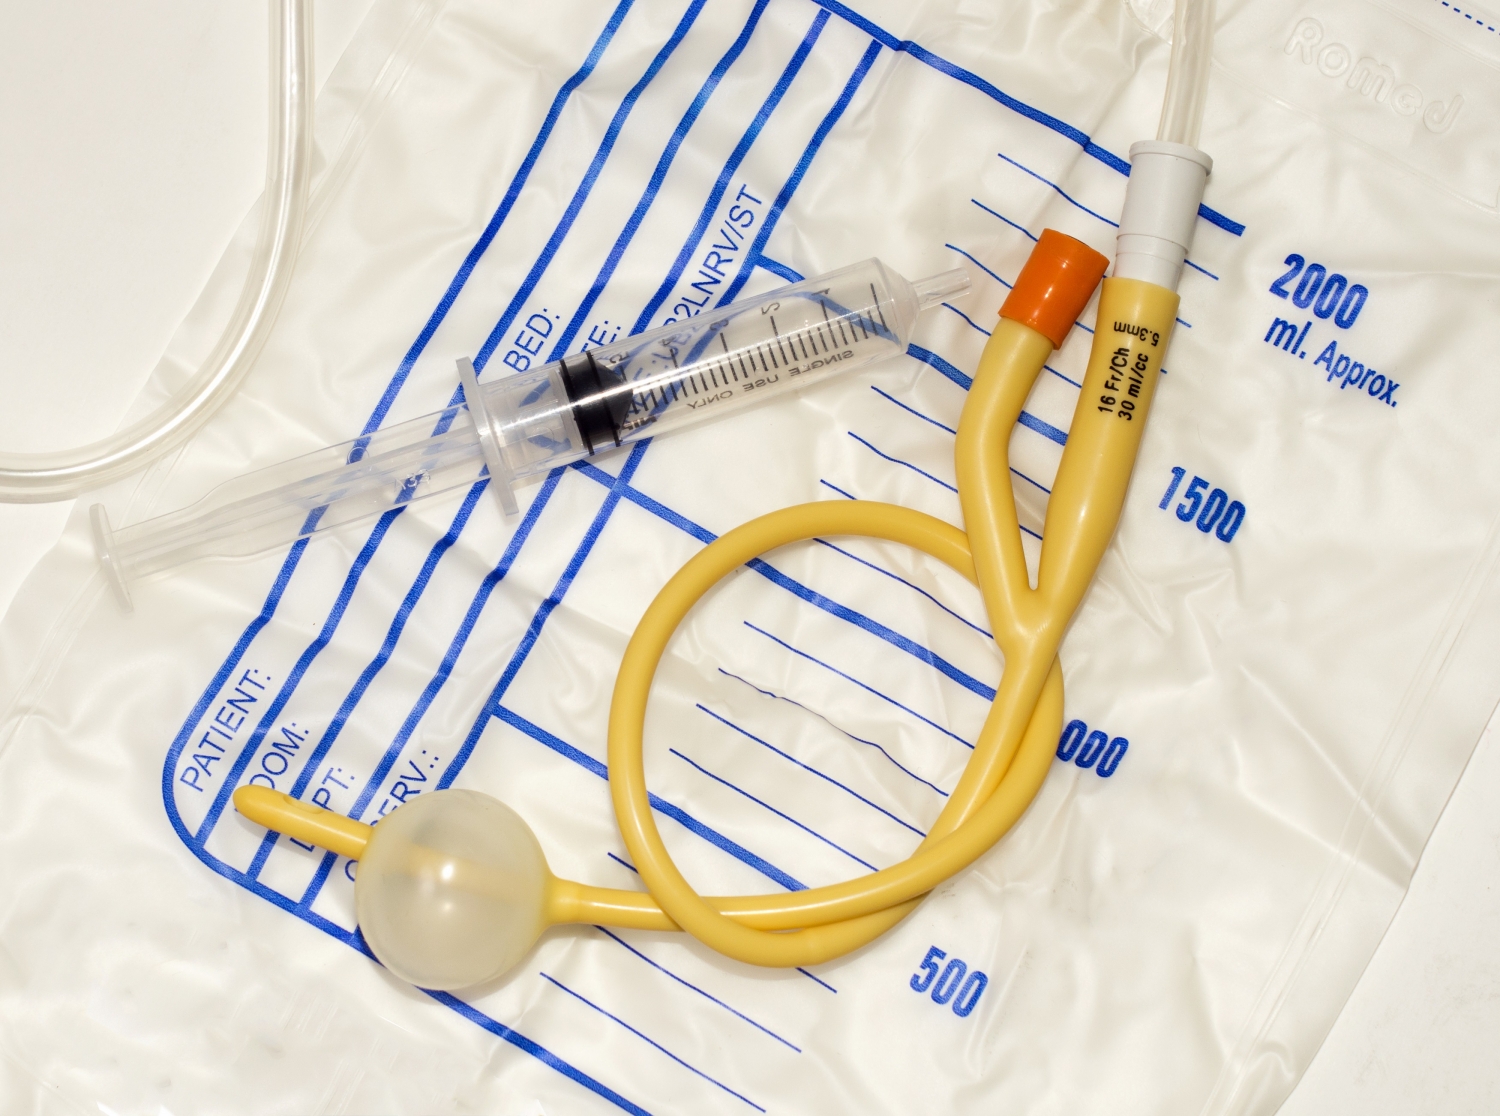 a-step-by-step-guide-to-catheterization-unitek-college